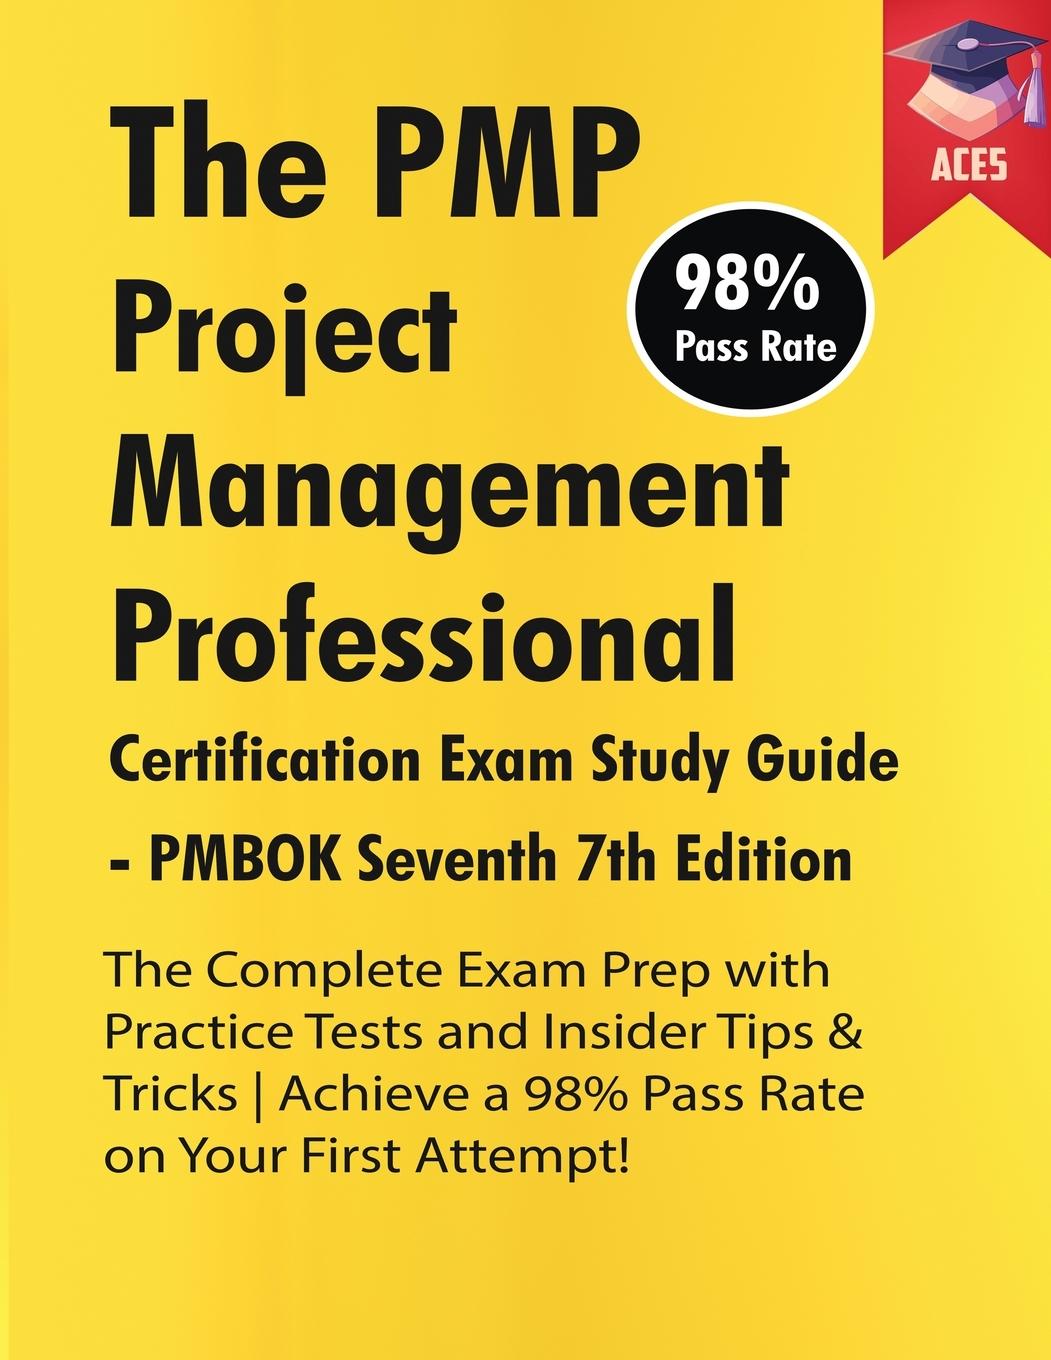 Book The PMP Project Management Professional Certification Exam Study Guide PMBOK Seventh 7th Edition 